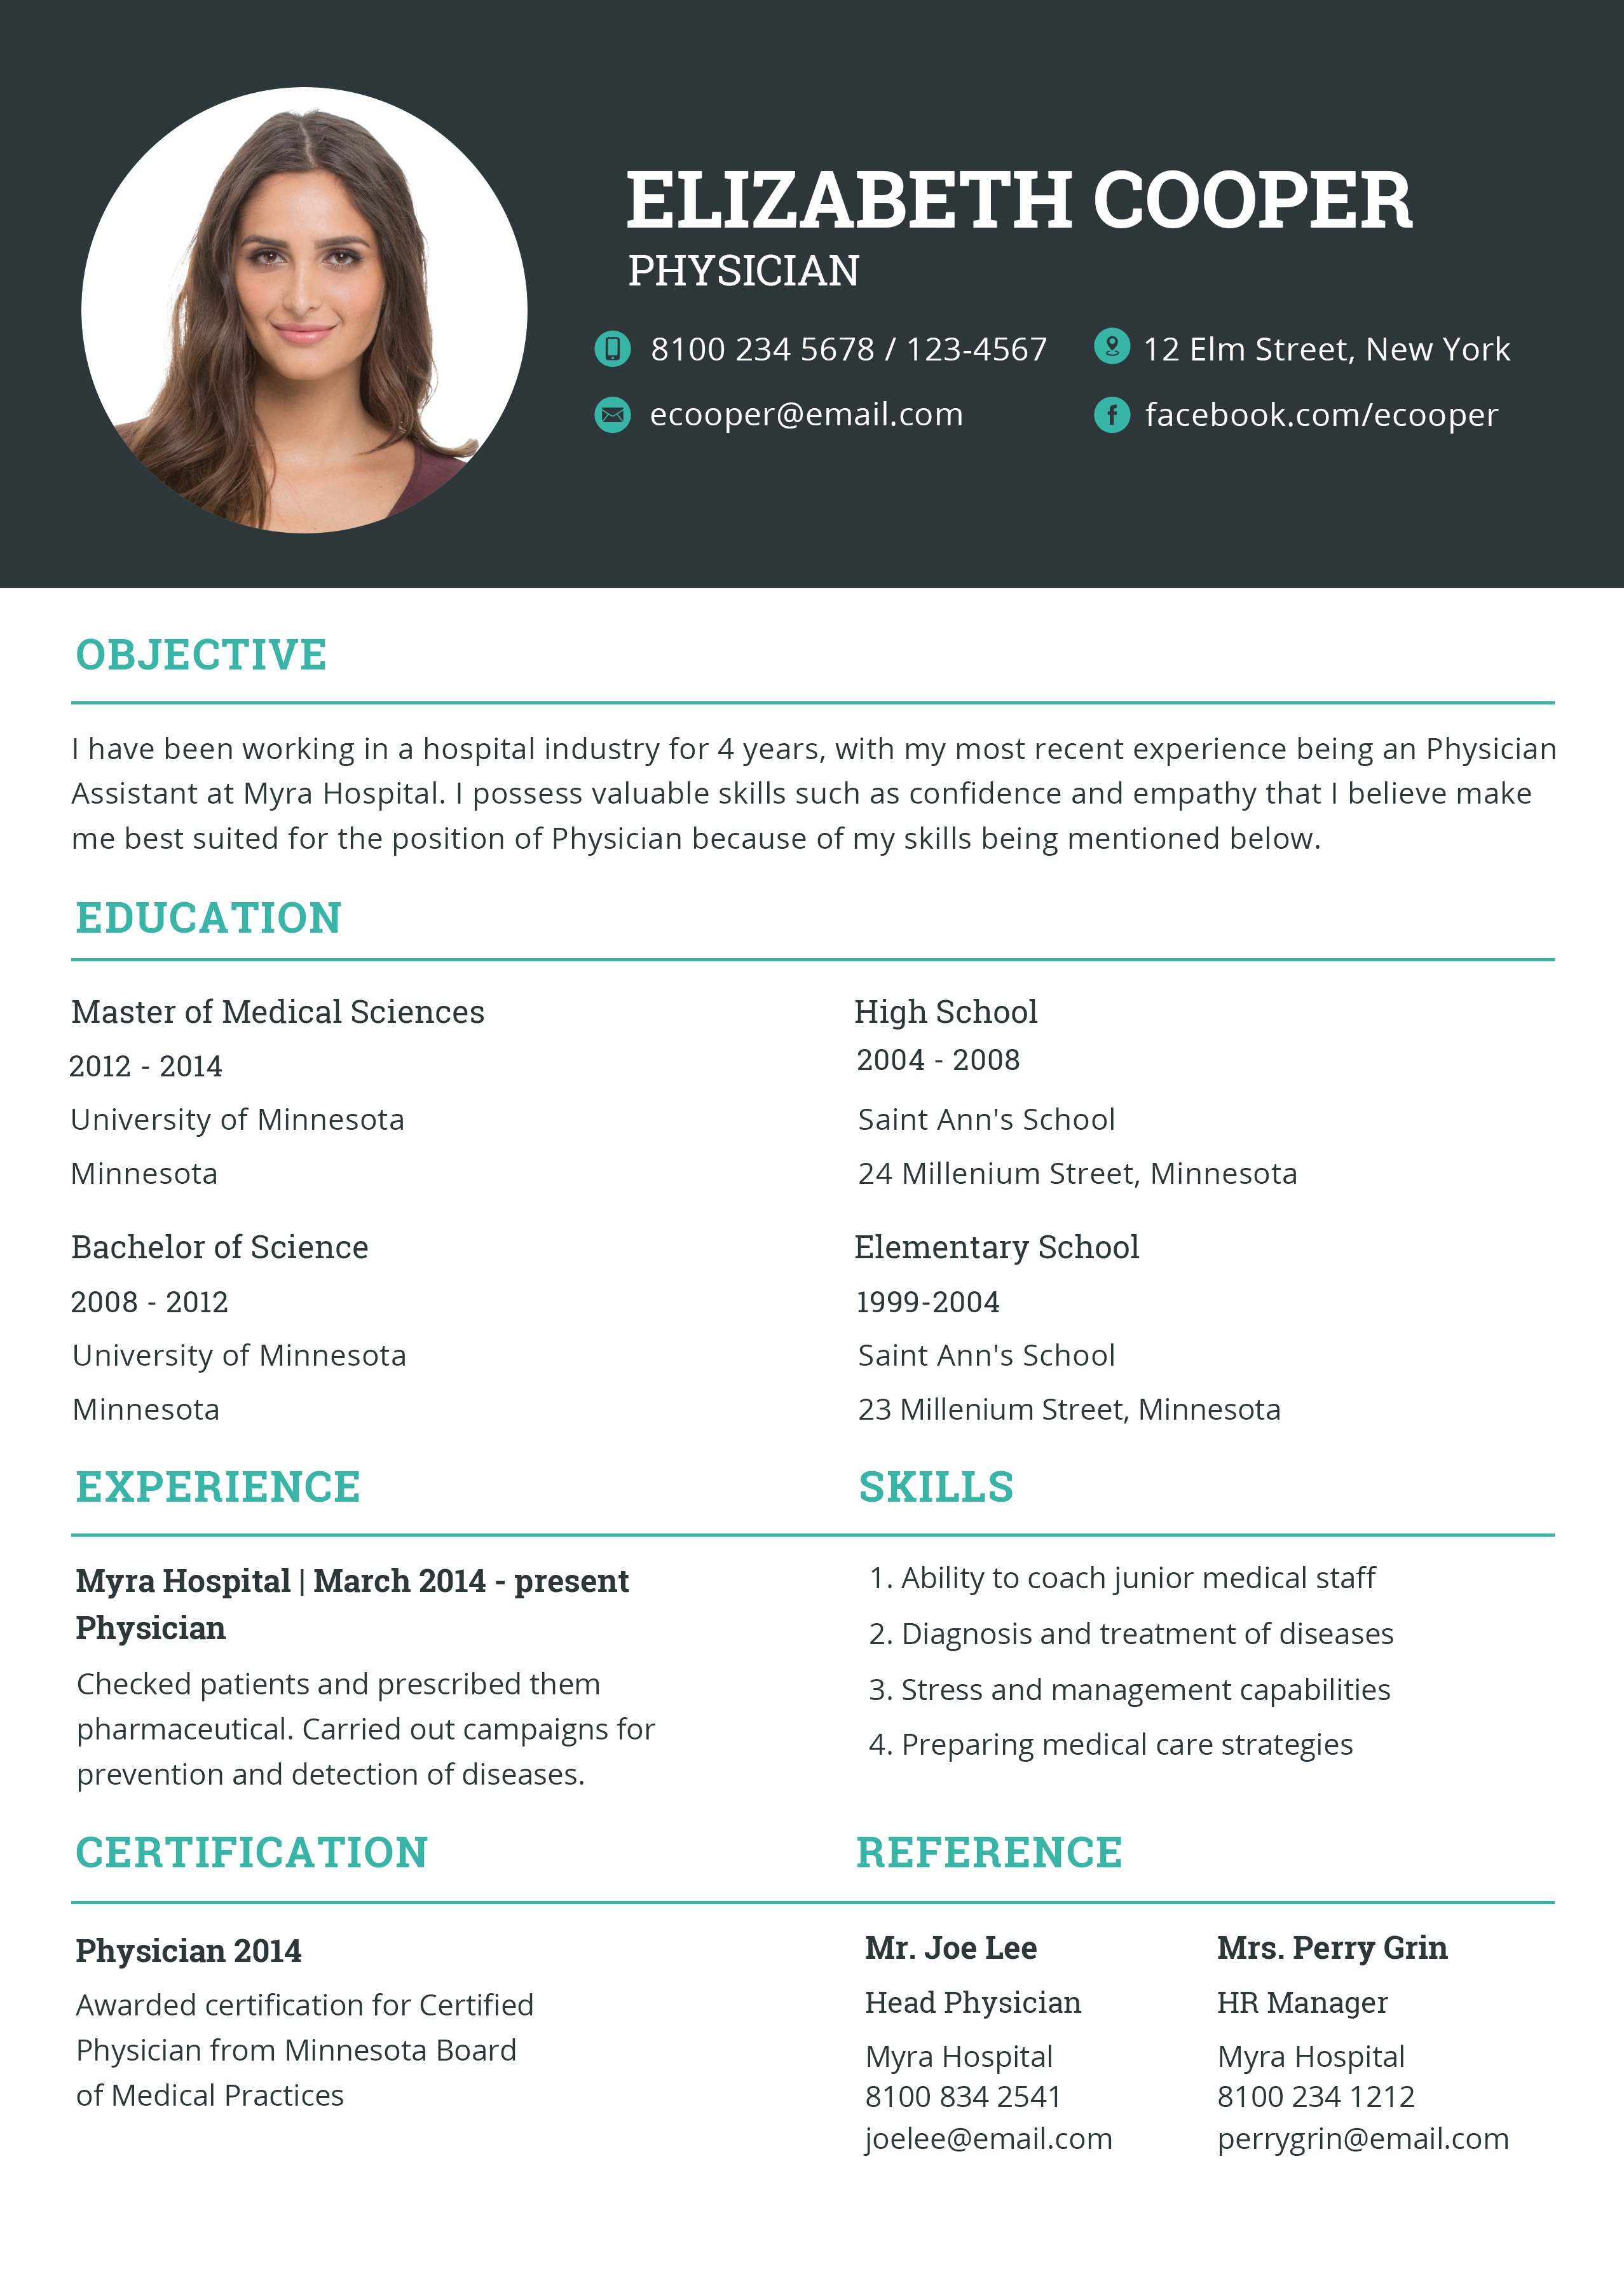 Free Physician Resume and CV Template in PSD, MS Word, Publisher